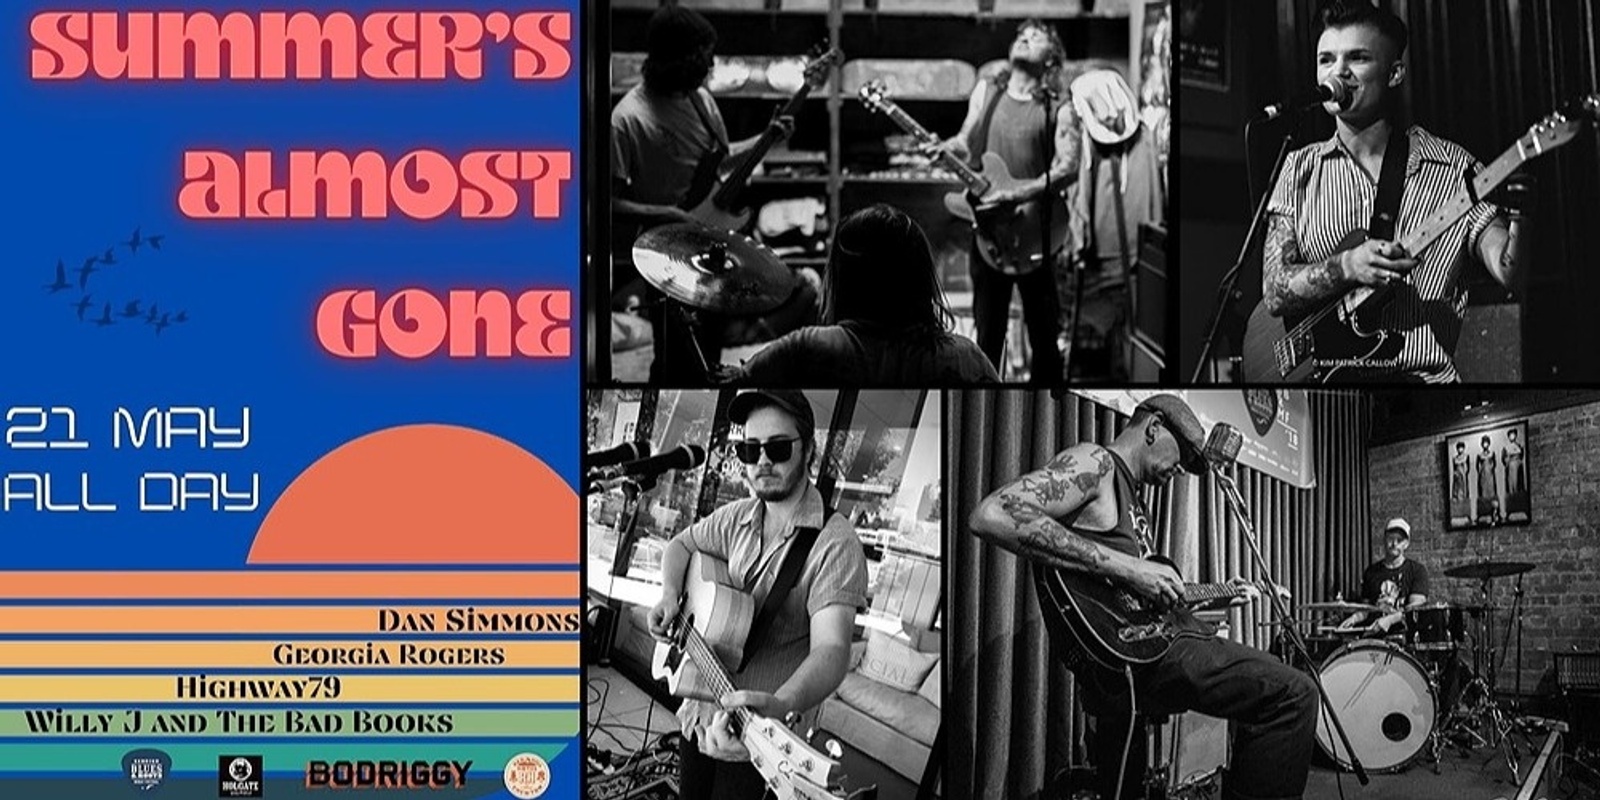 Banner image for 'Summer's Almost Gone' at The Red Hill Hotel, feat: Willie J & The Bad Books + Highway 79 + Georgia Rodgers + Dan Simons